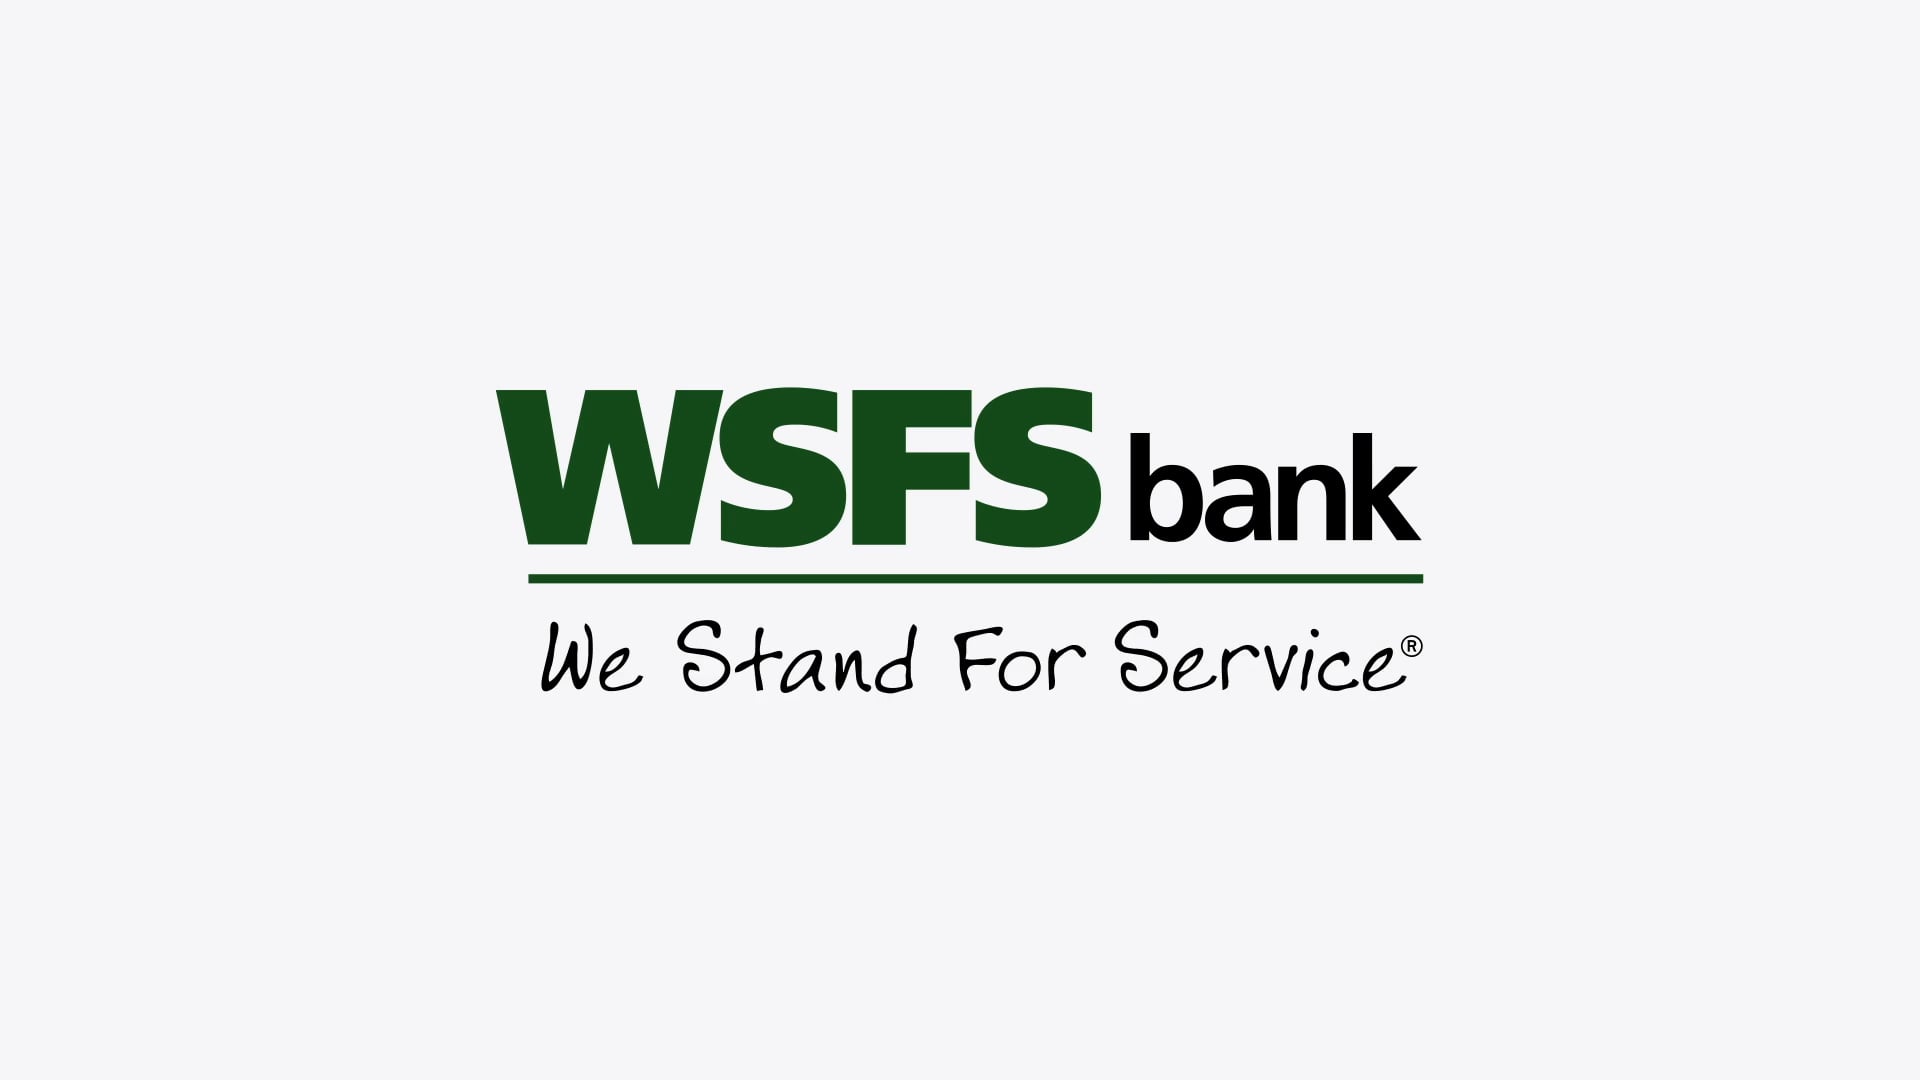 MyWSFS Personal Bankers